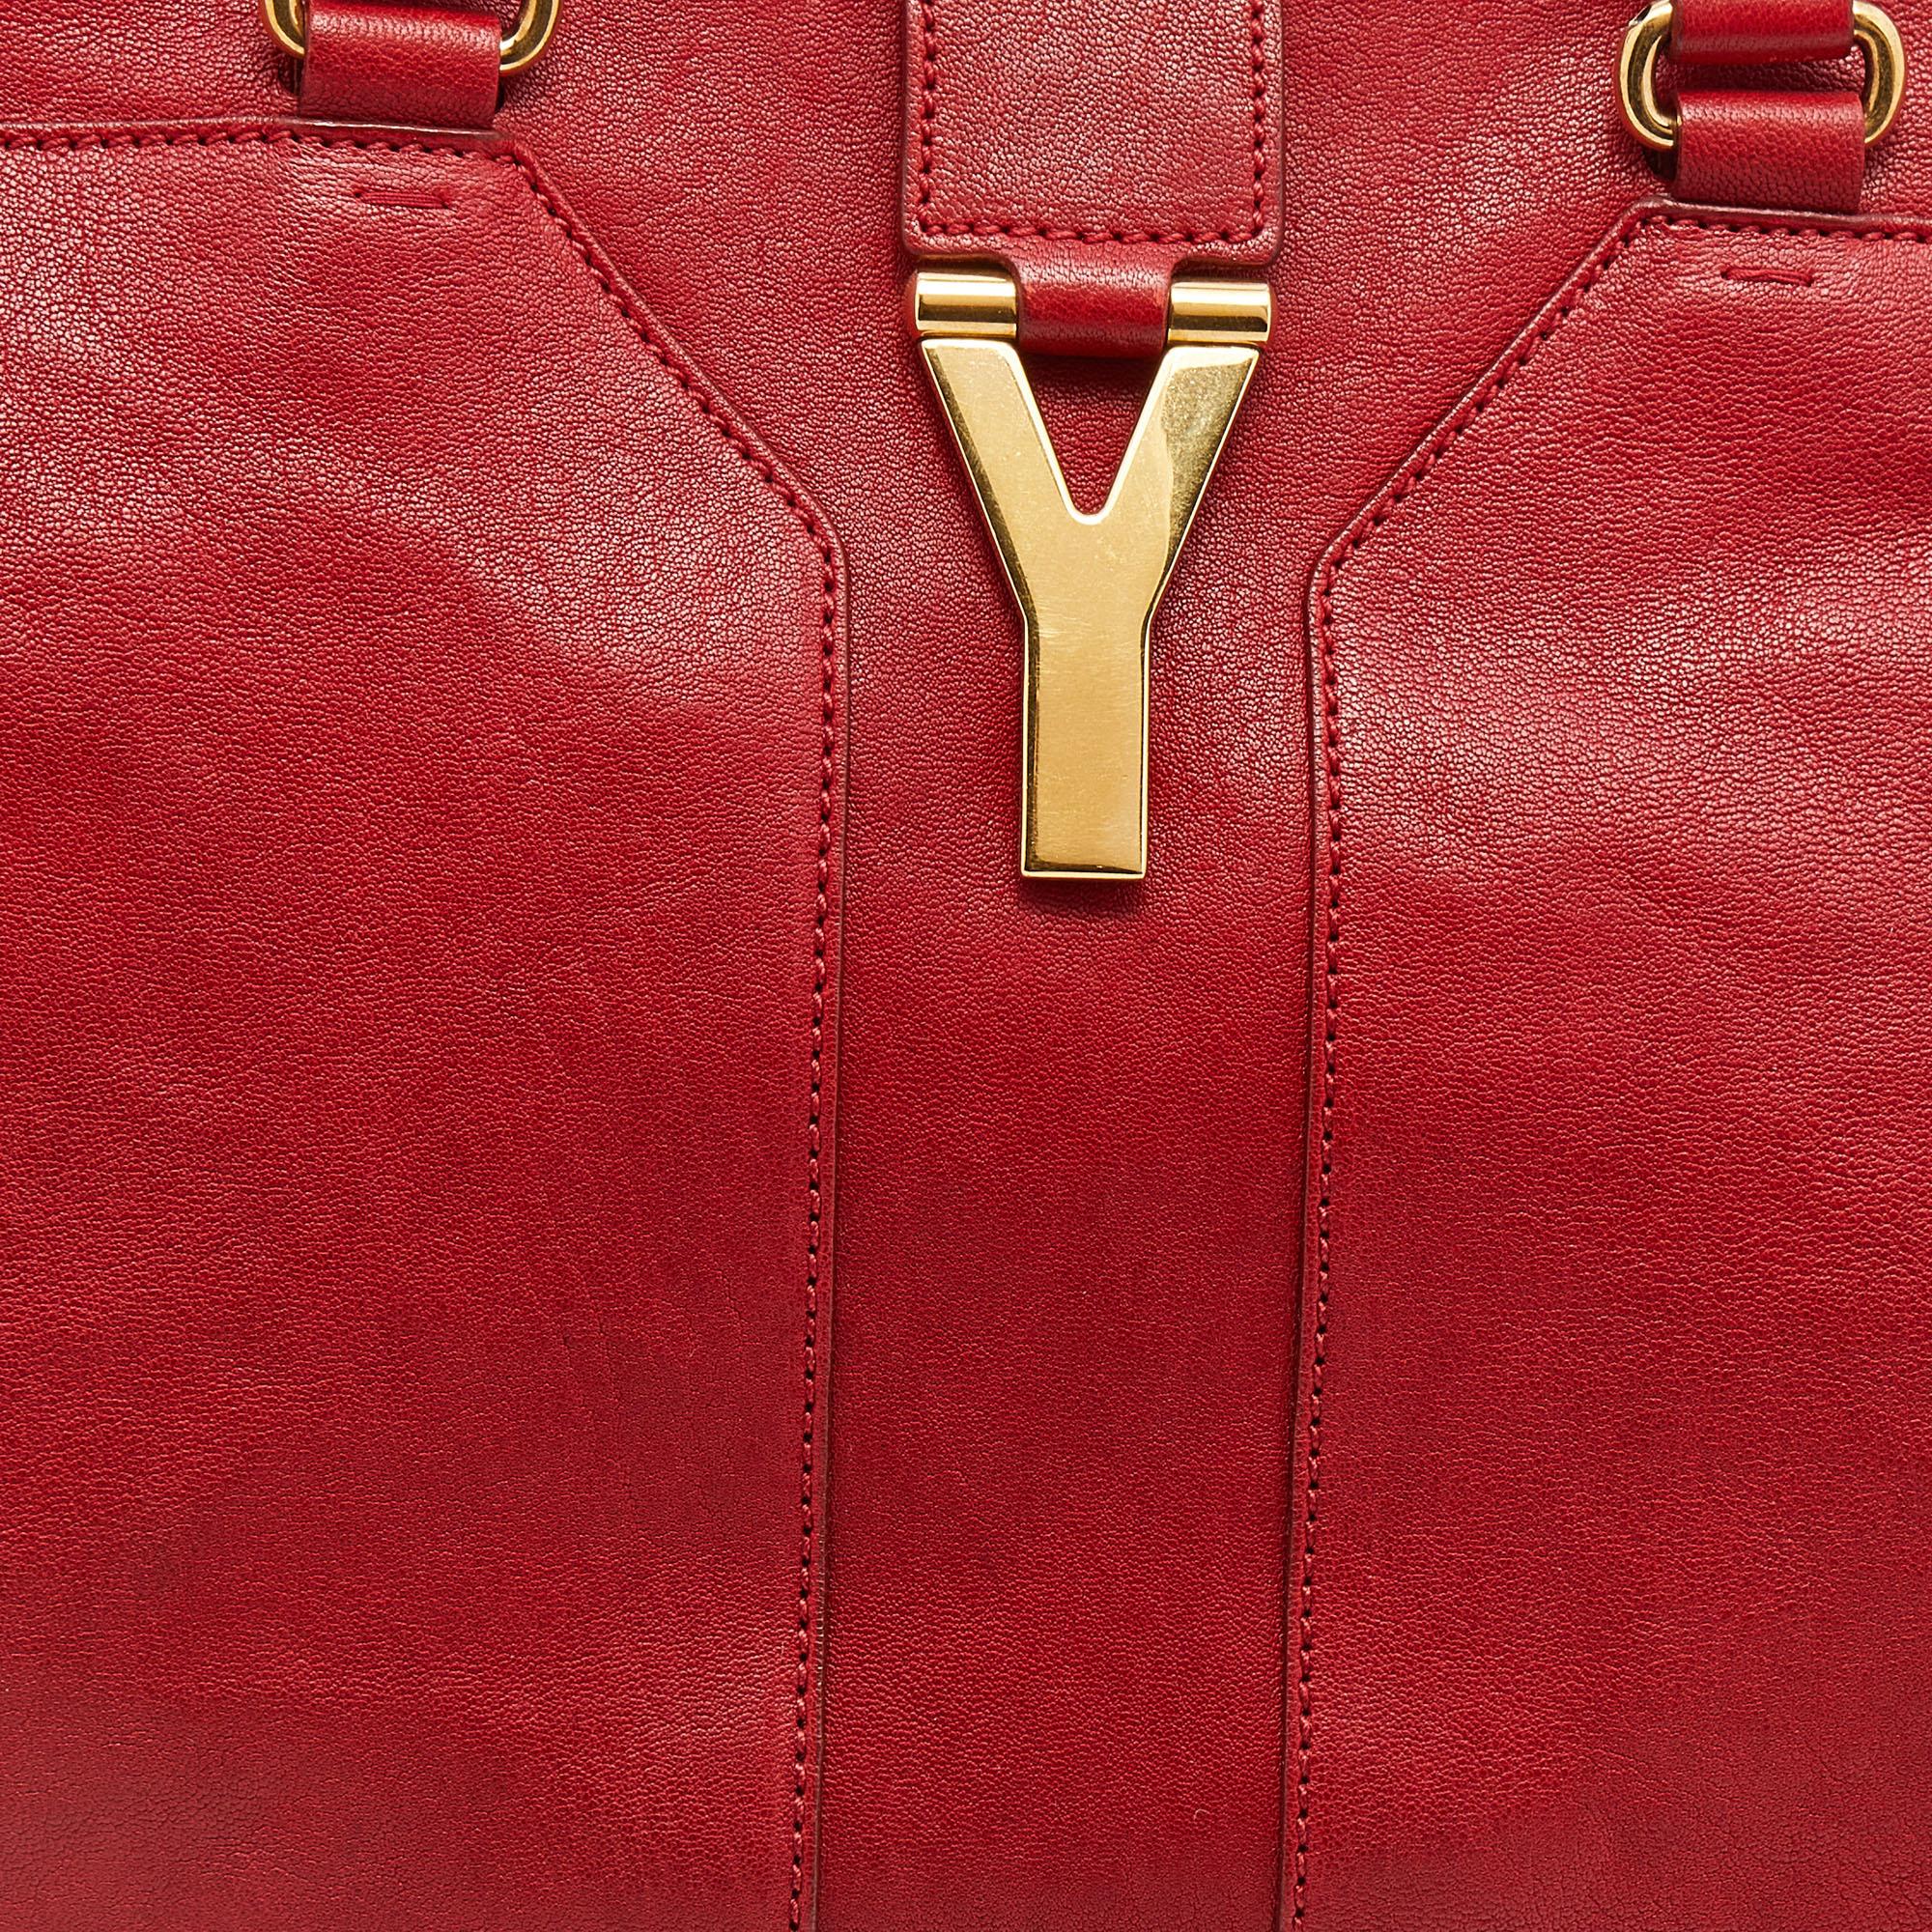 Yves Saint Laurent Red Leather Large Y Cabas Chyc Tote 4